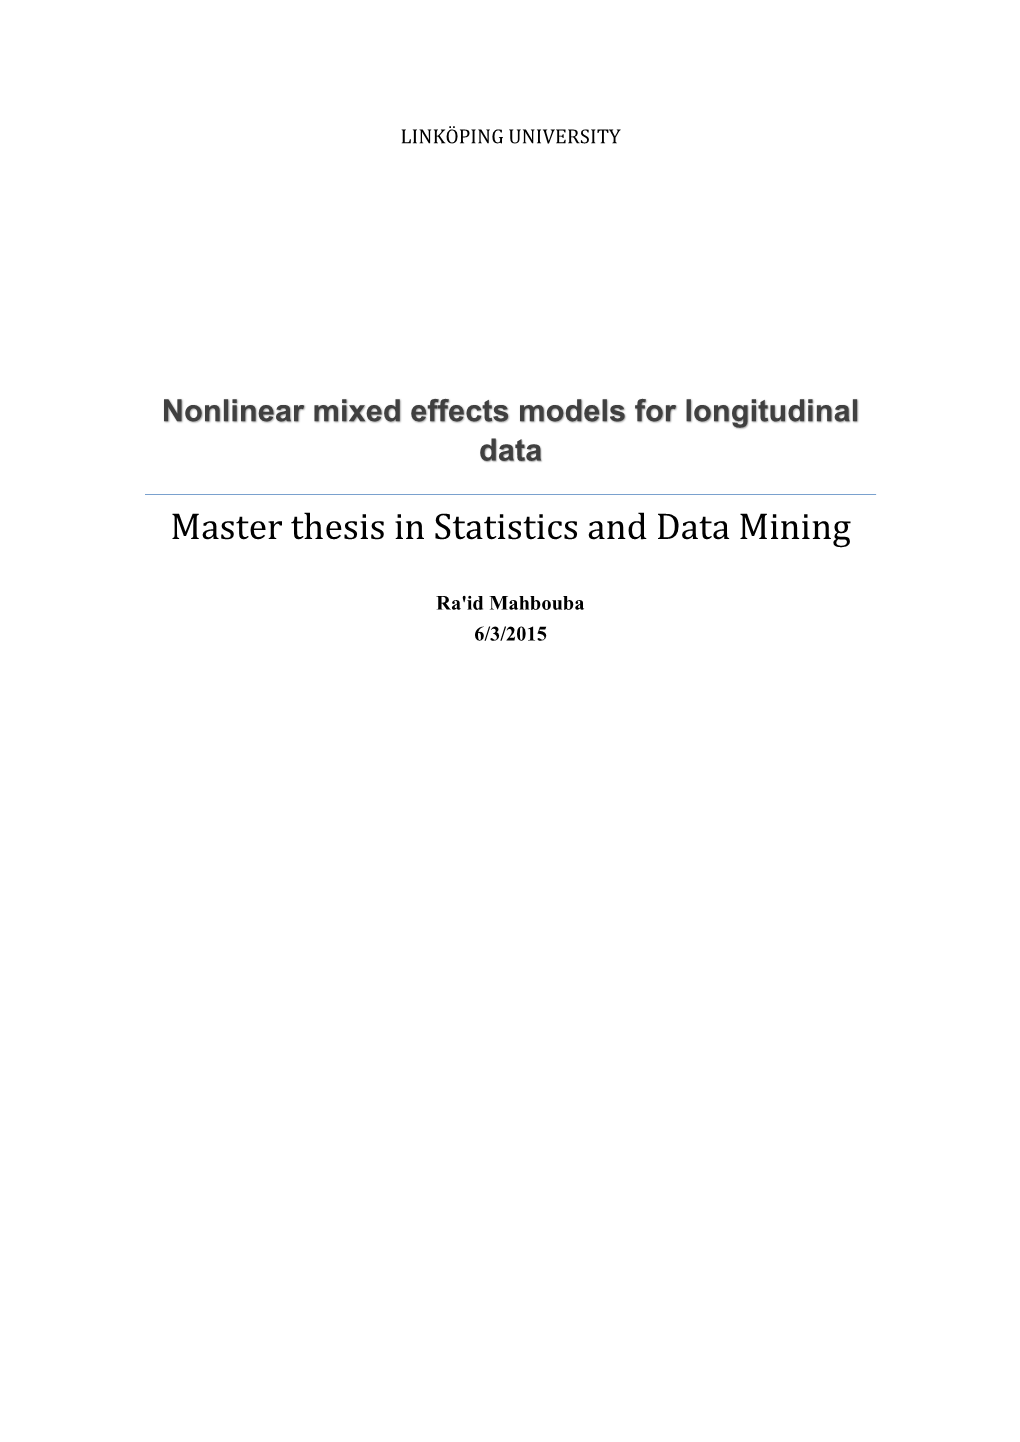 Nonlinear Mixed Effects Models for Longitudinal Data Master Thesis in Statistics and Data Mining